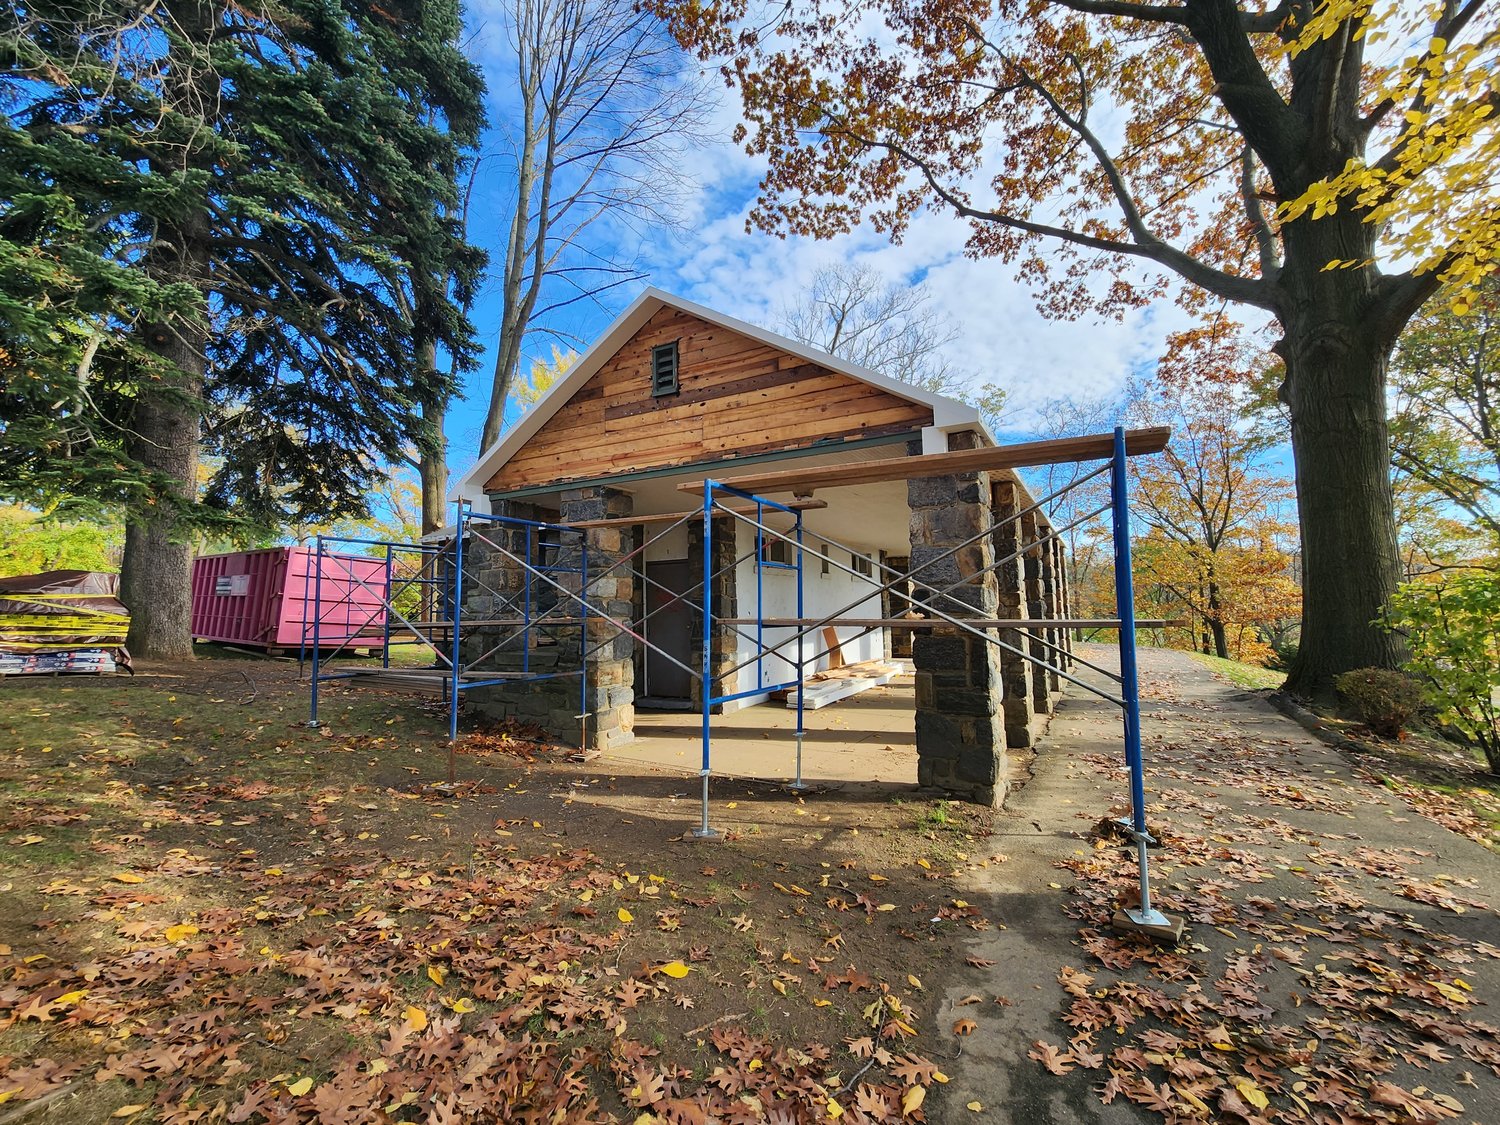 Morgan Park’s upper bathhouse is currently under renovations. The building needs extensive repair to its roof and plumbing.